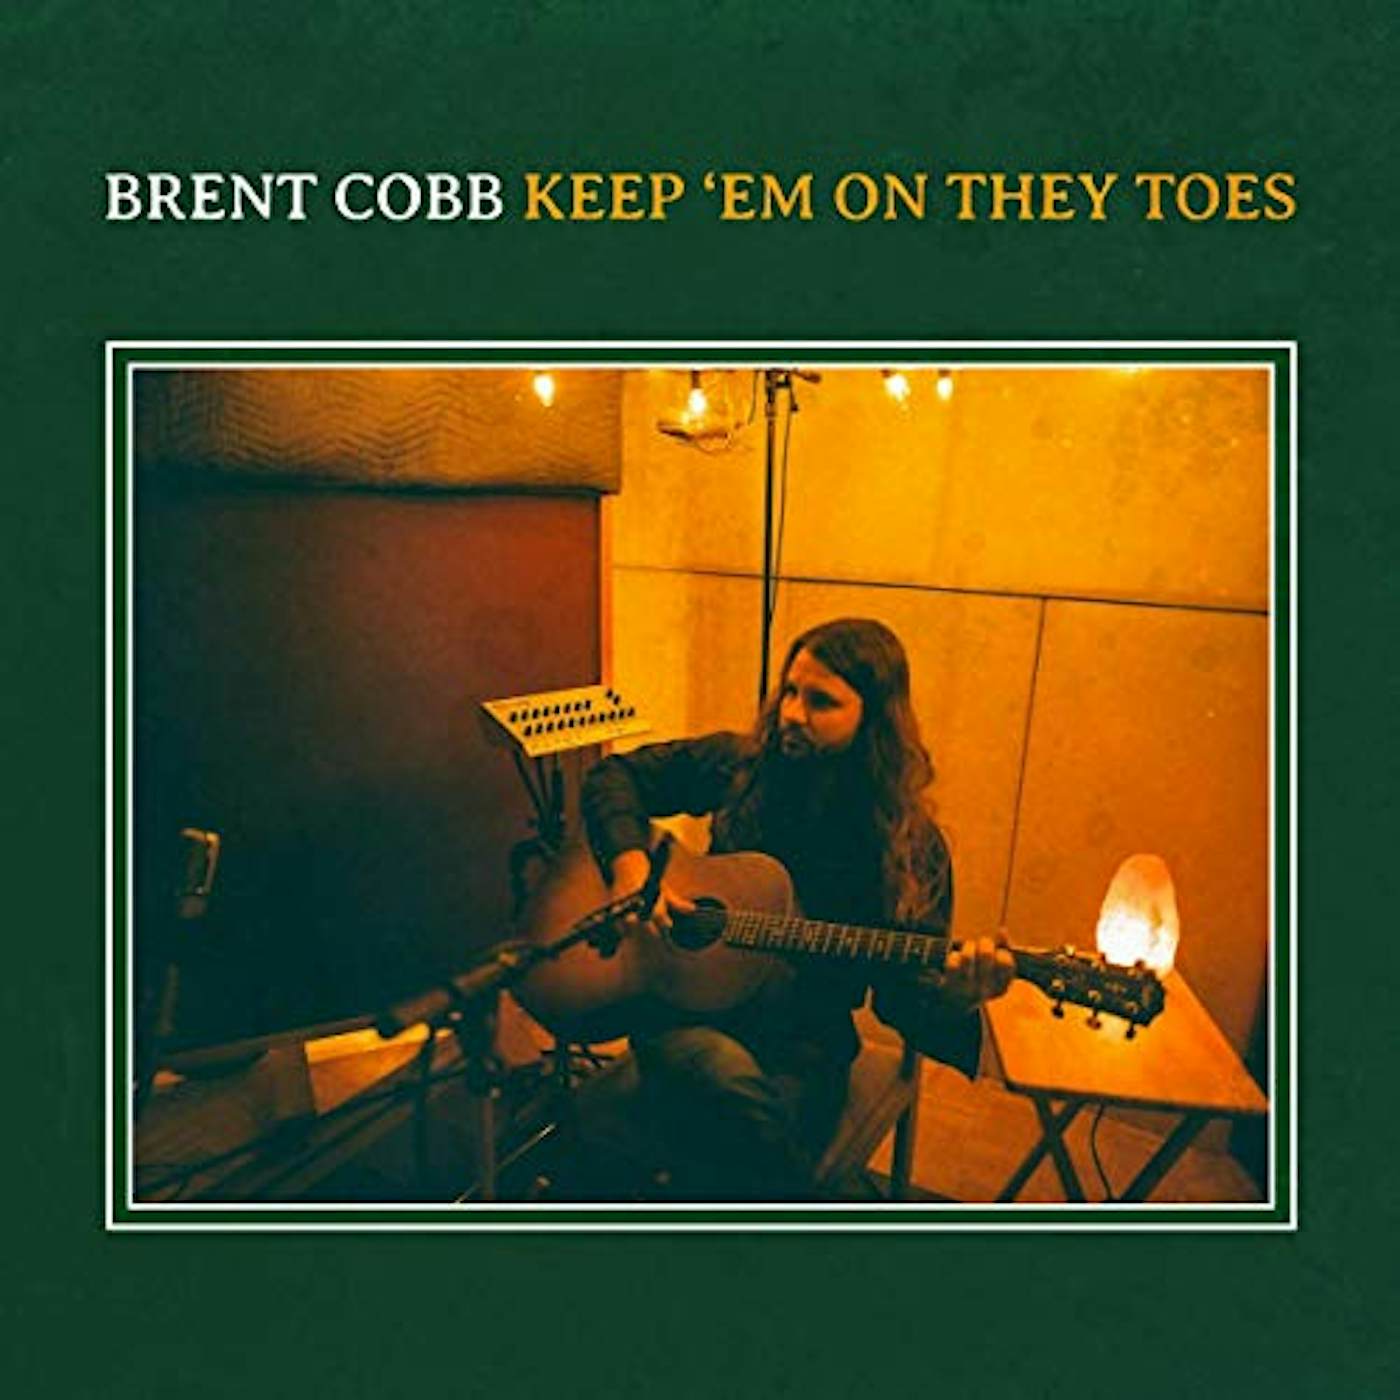 Brent Cobb Keep 'Em on They Toes Vinyl Record